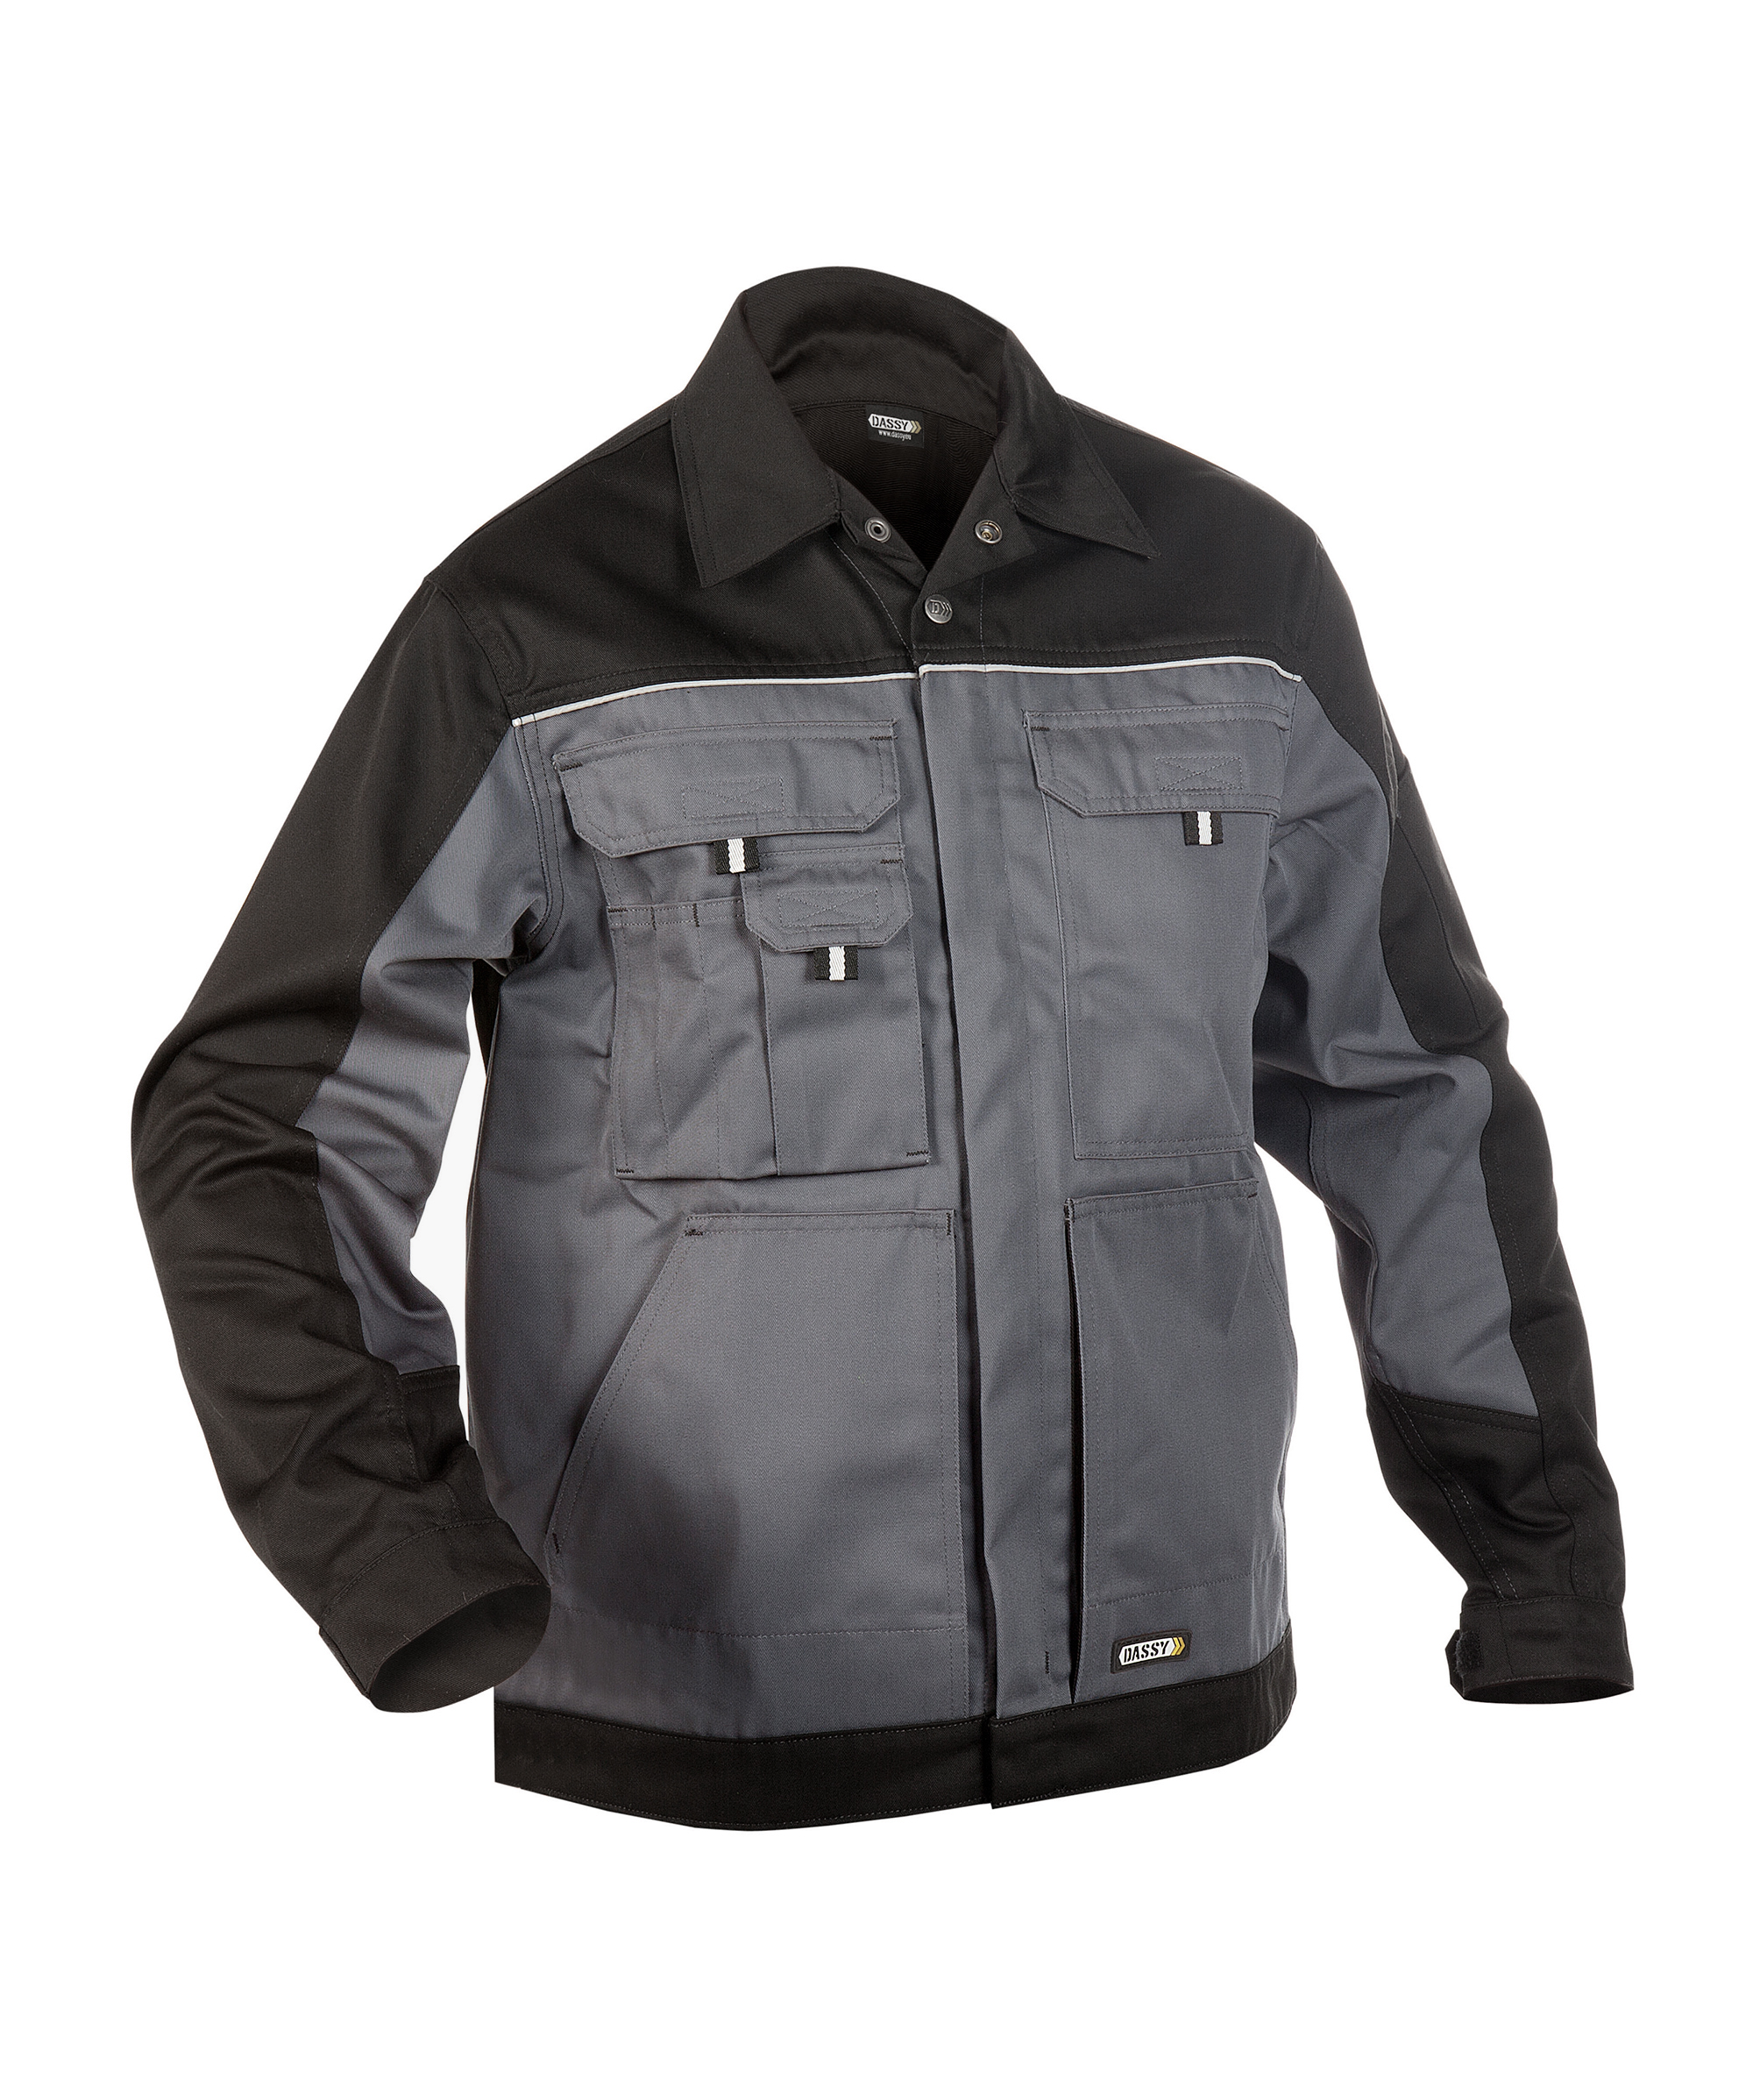 lugano_two-tone-work-jacket_cement-grey-black_front.jpg